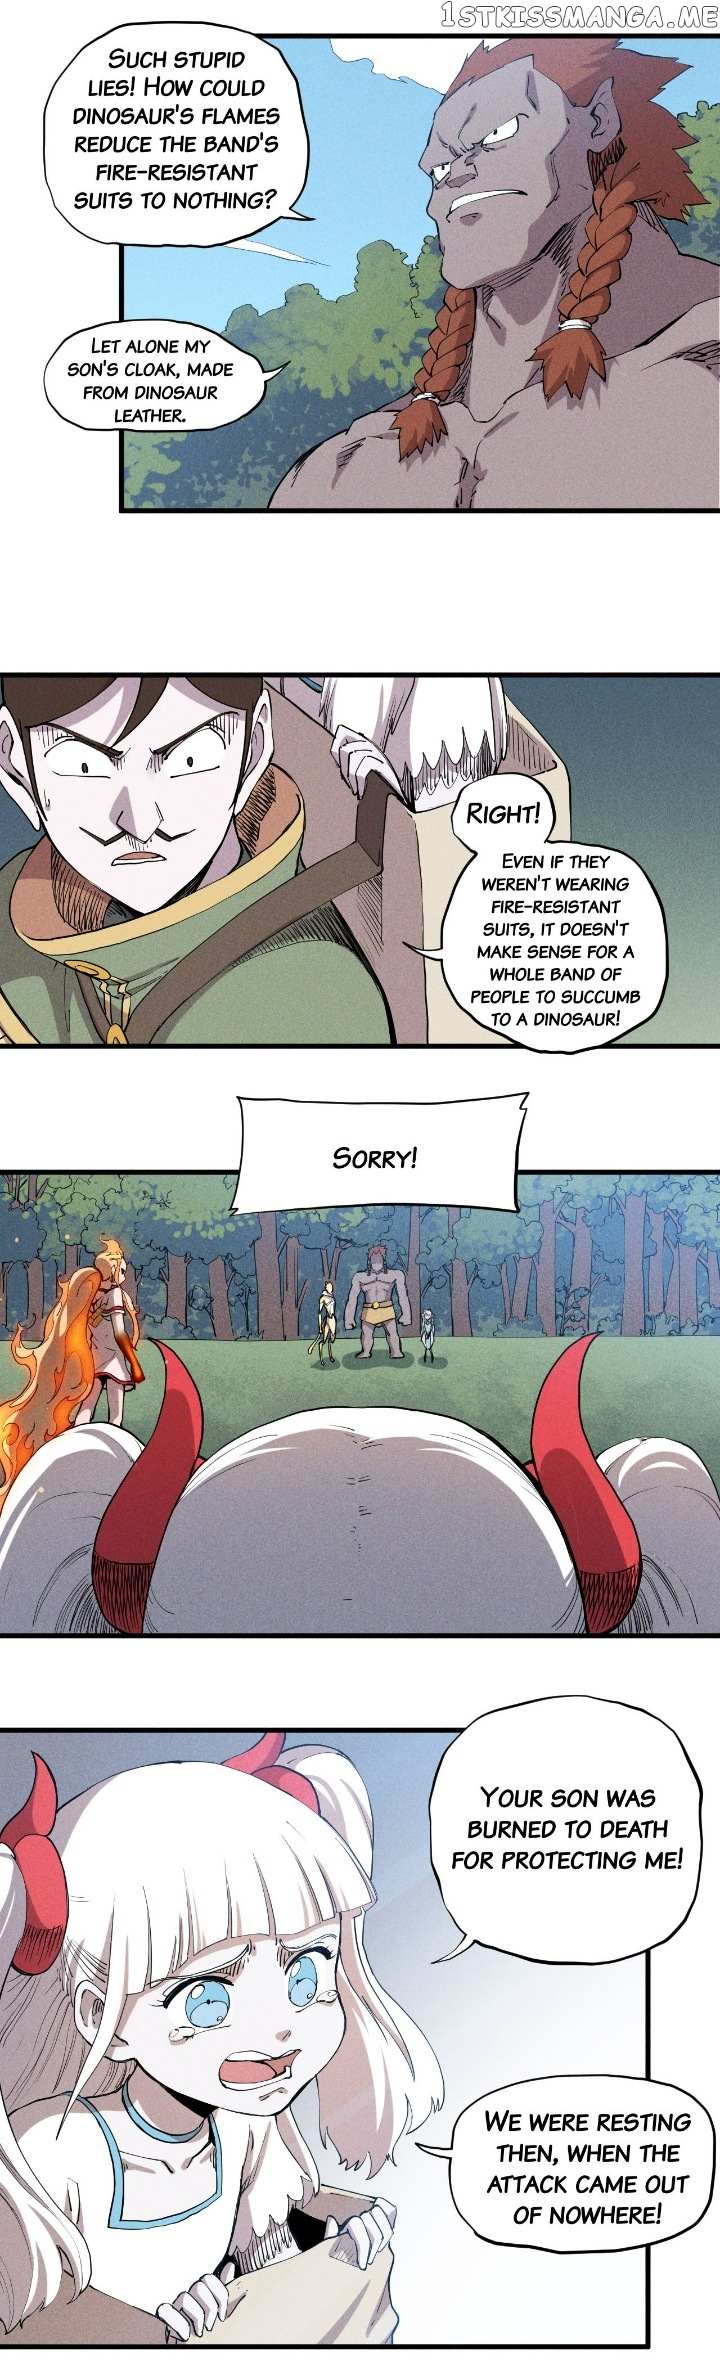 The God Of Flame - Page 3